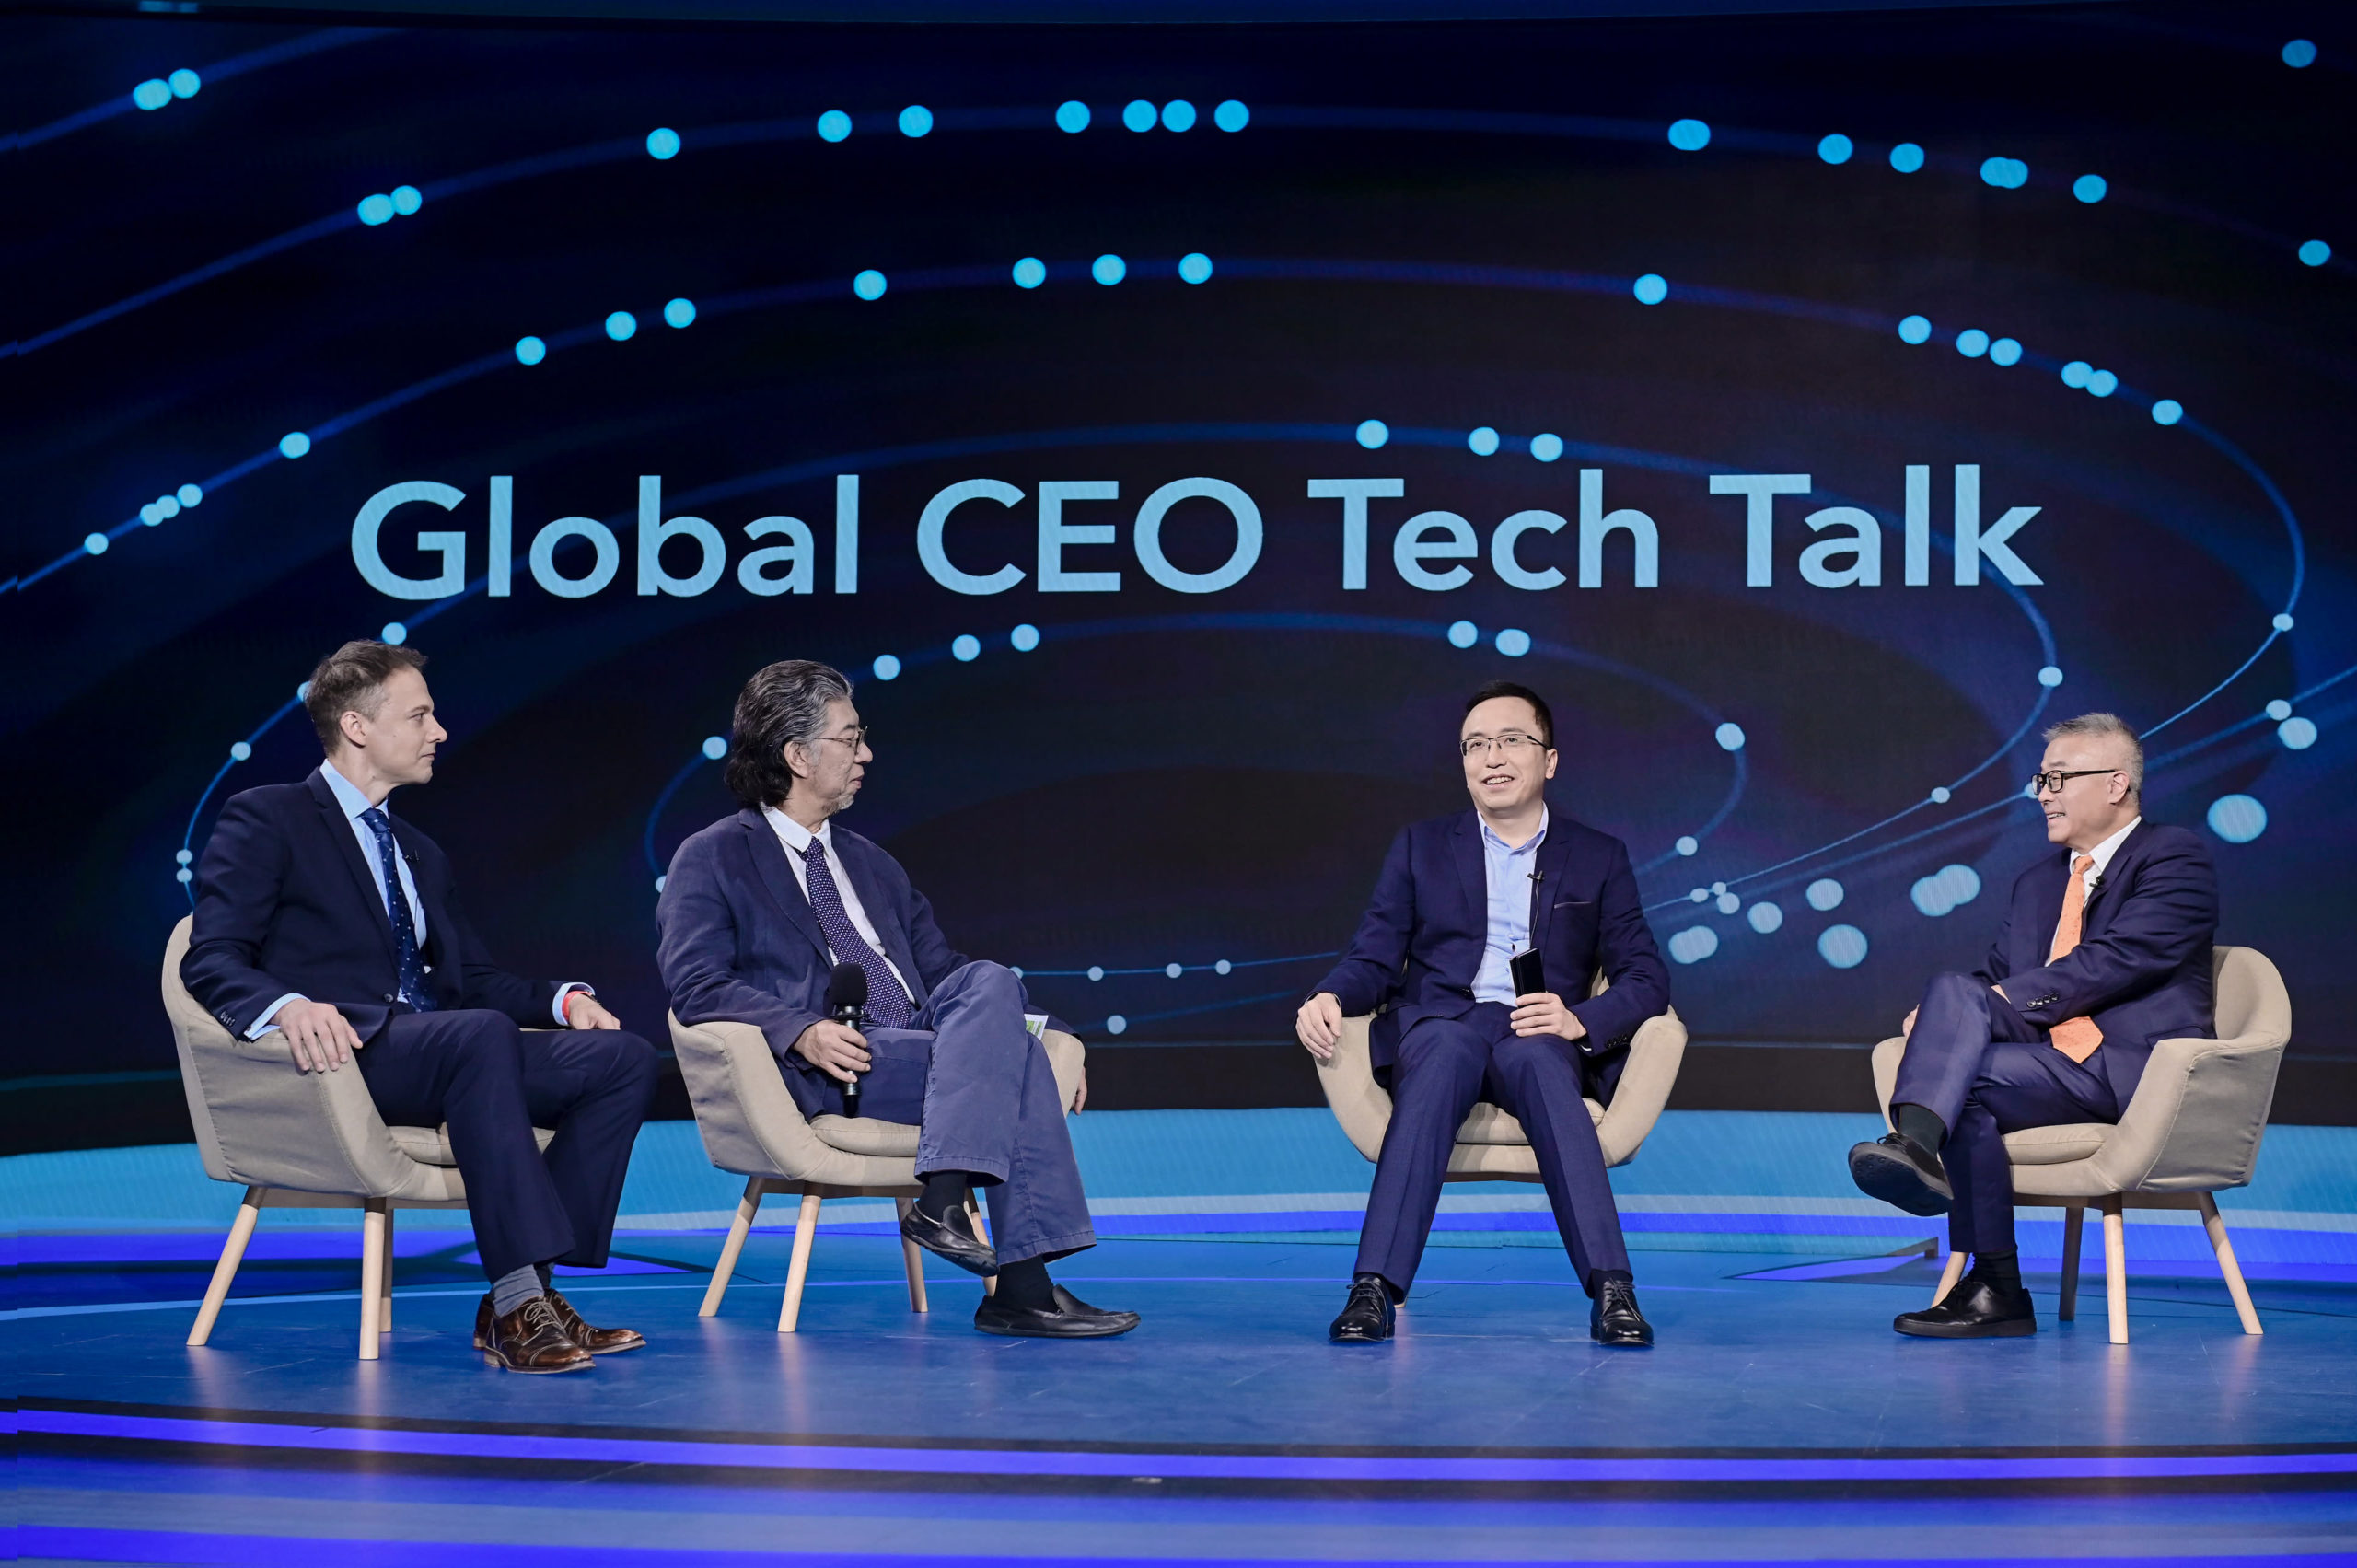 Global CEO Tech Talk路透社全球CEO对话4